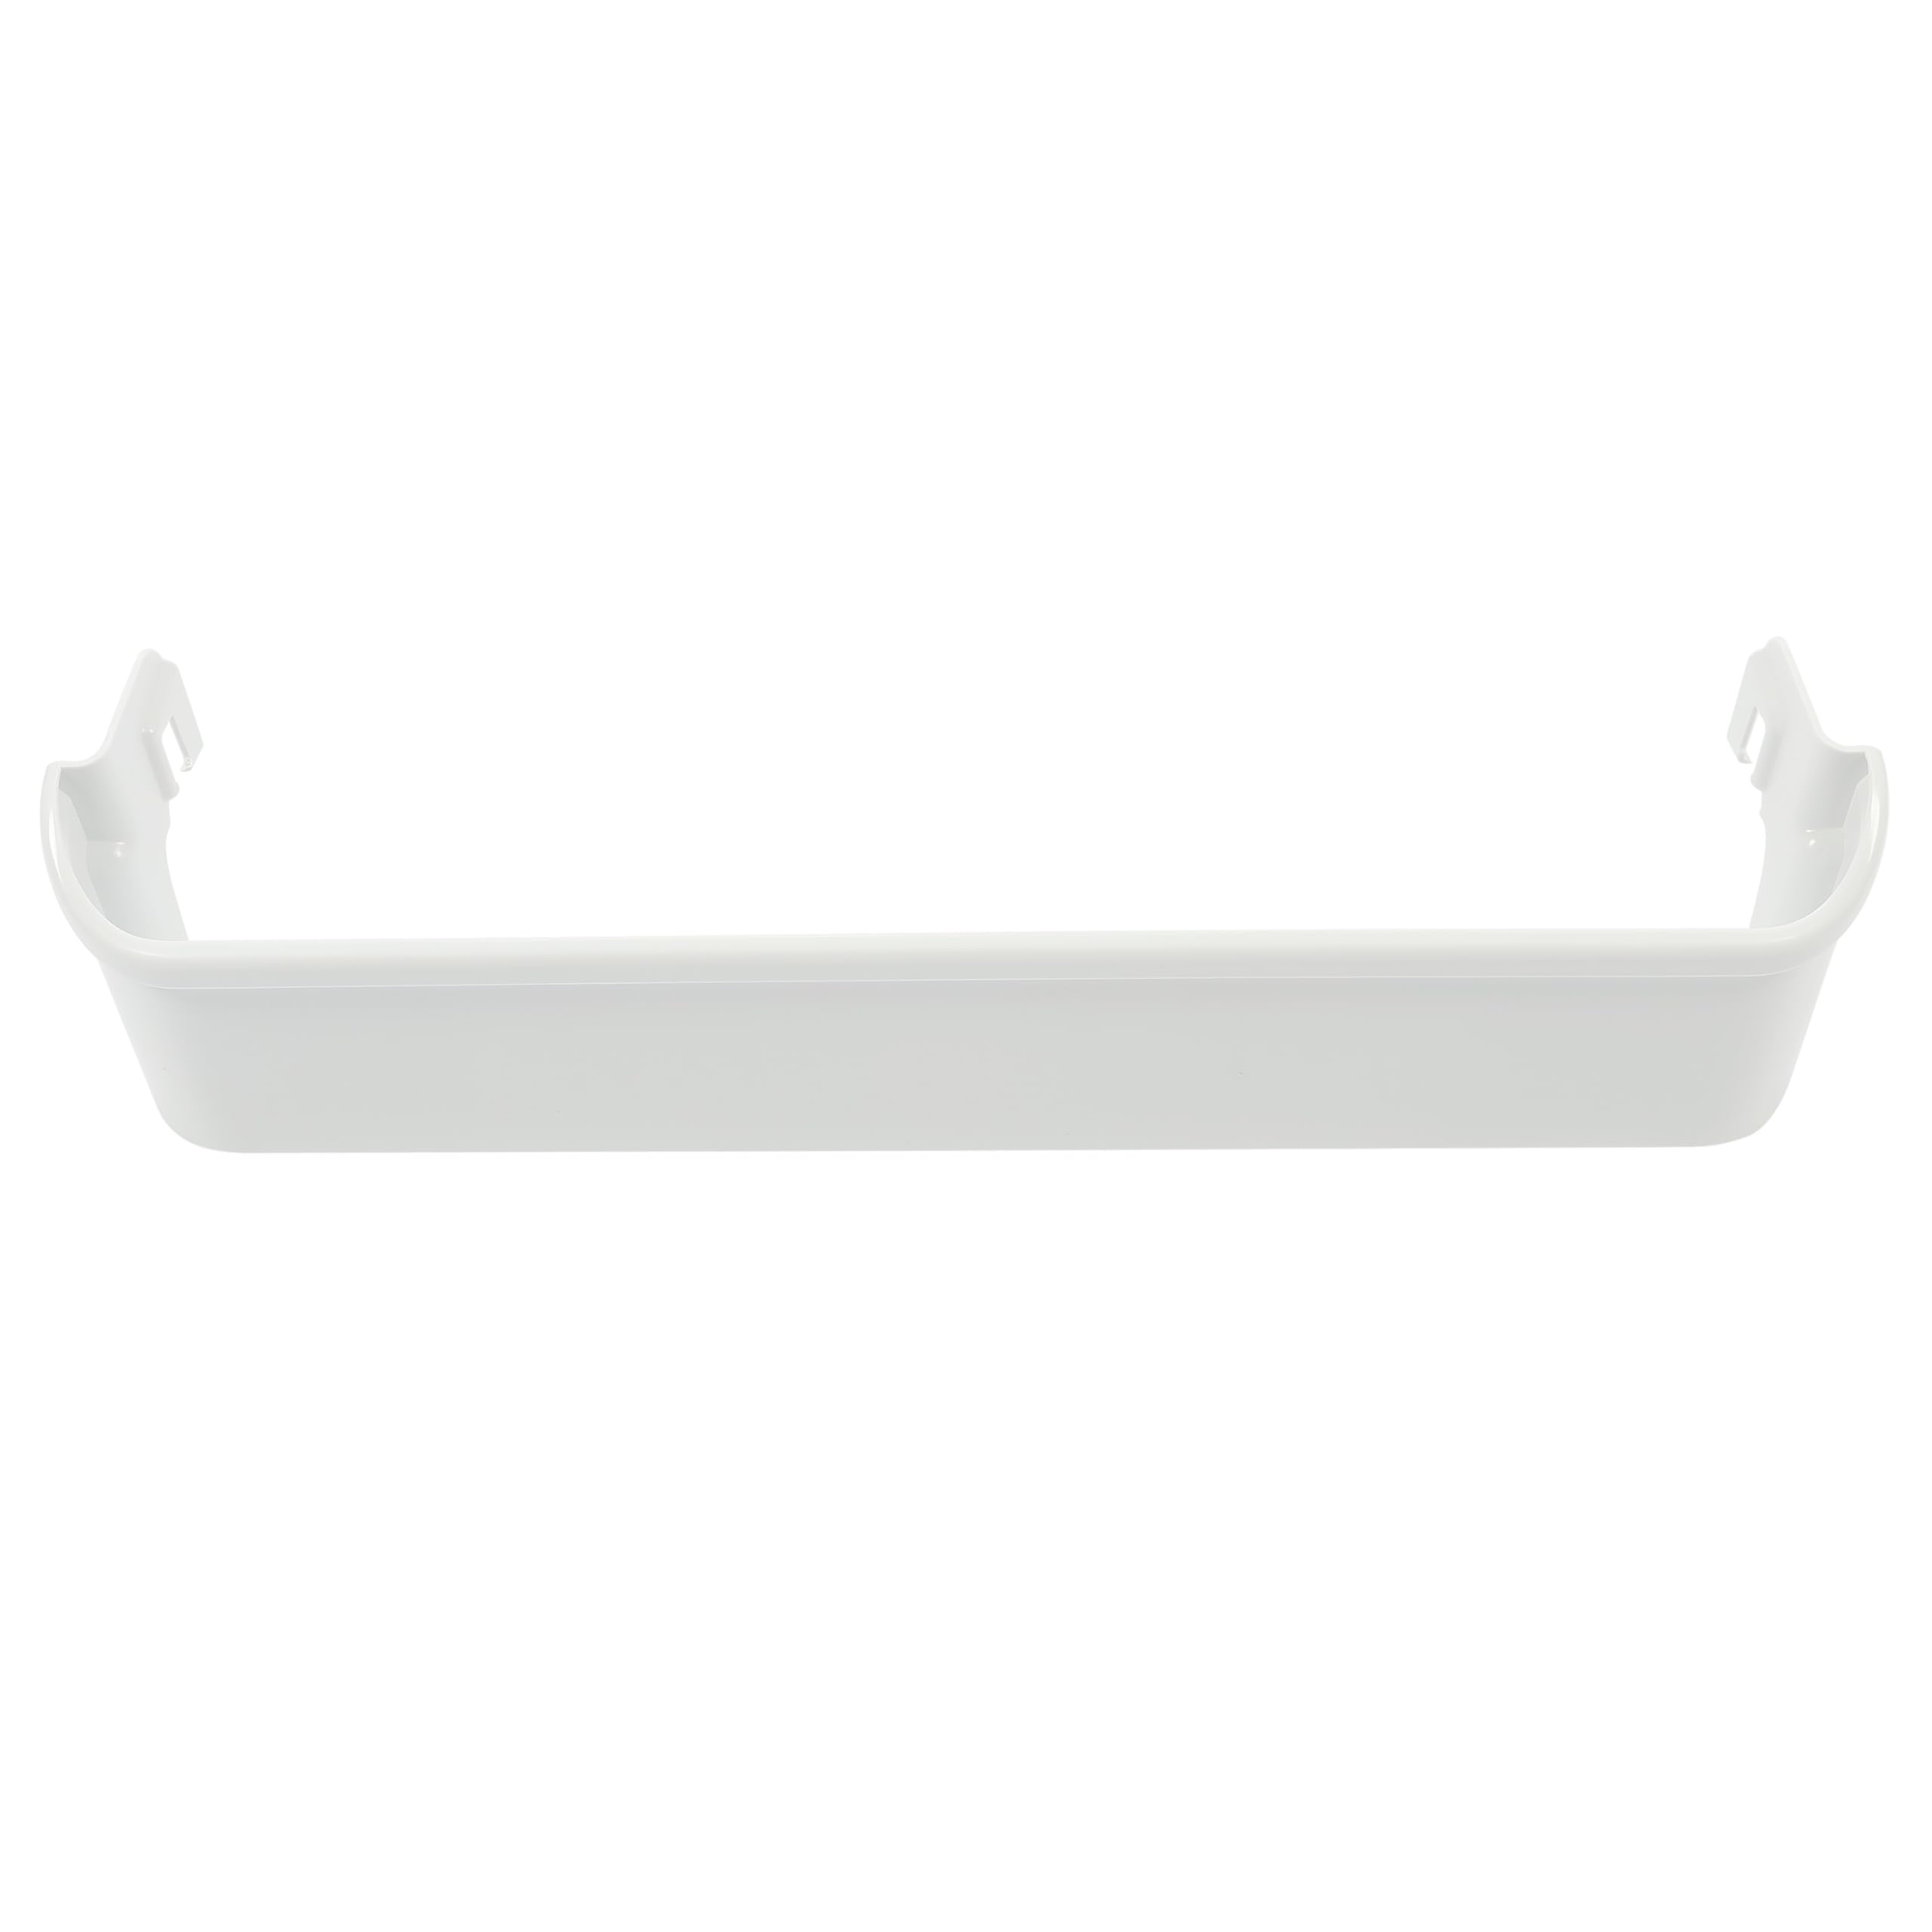 HECASA 240338101 AP2115860 Refrigerator Door Bin Shelf Compatible with Frigidaire or Kenmore Refrigerator for 891051 PS429873 Replacement only White ABS Plastic